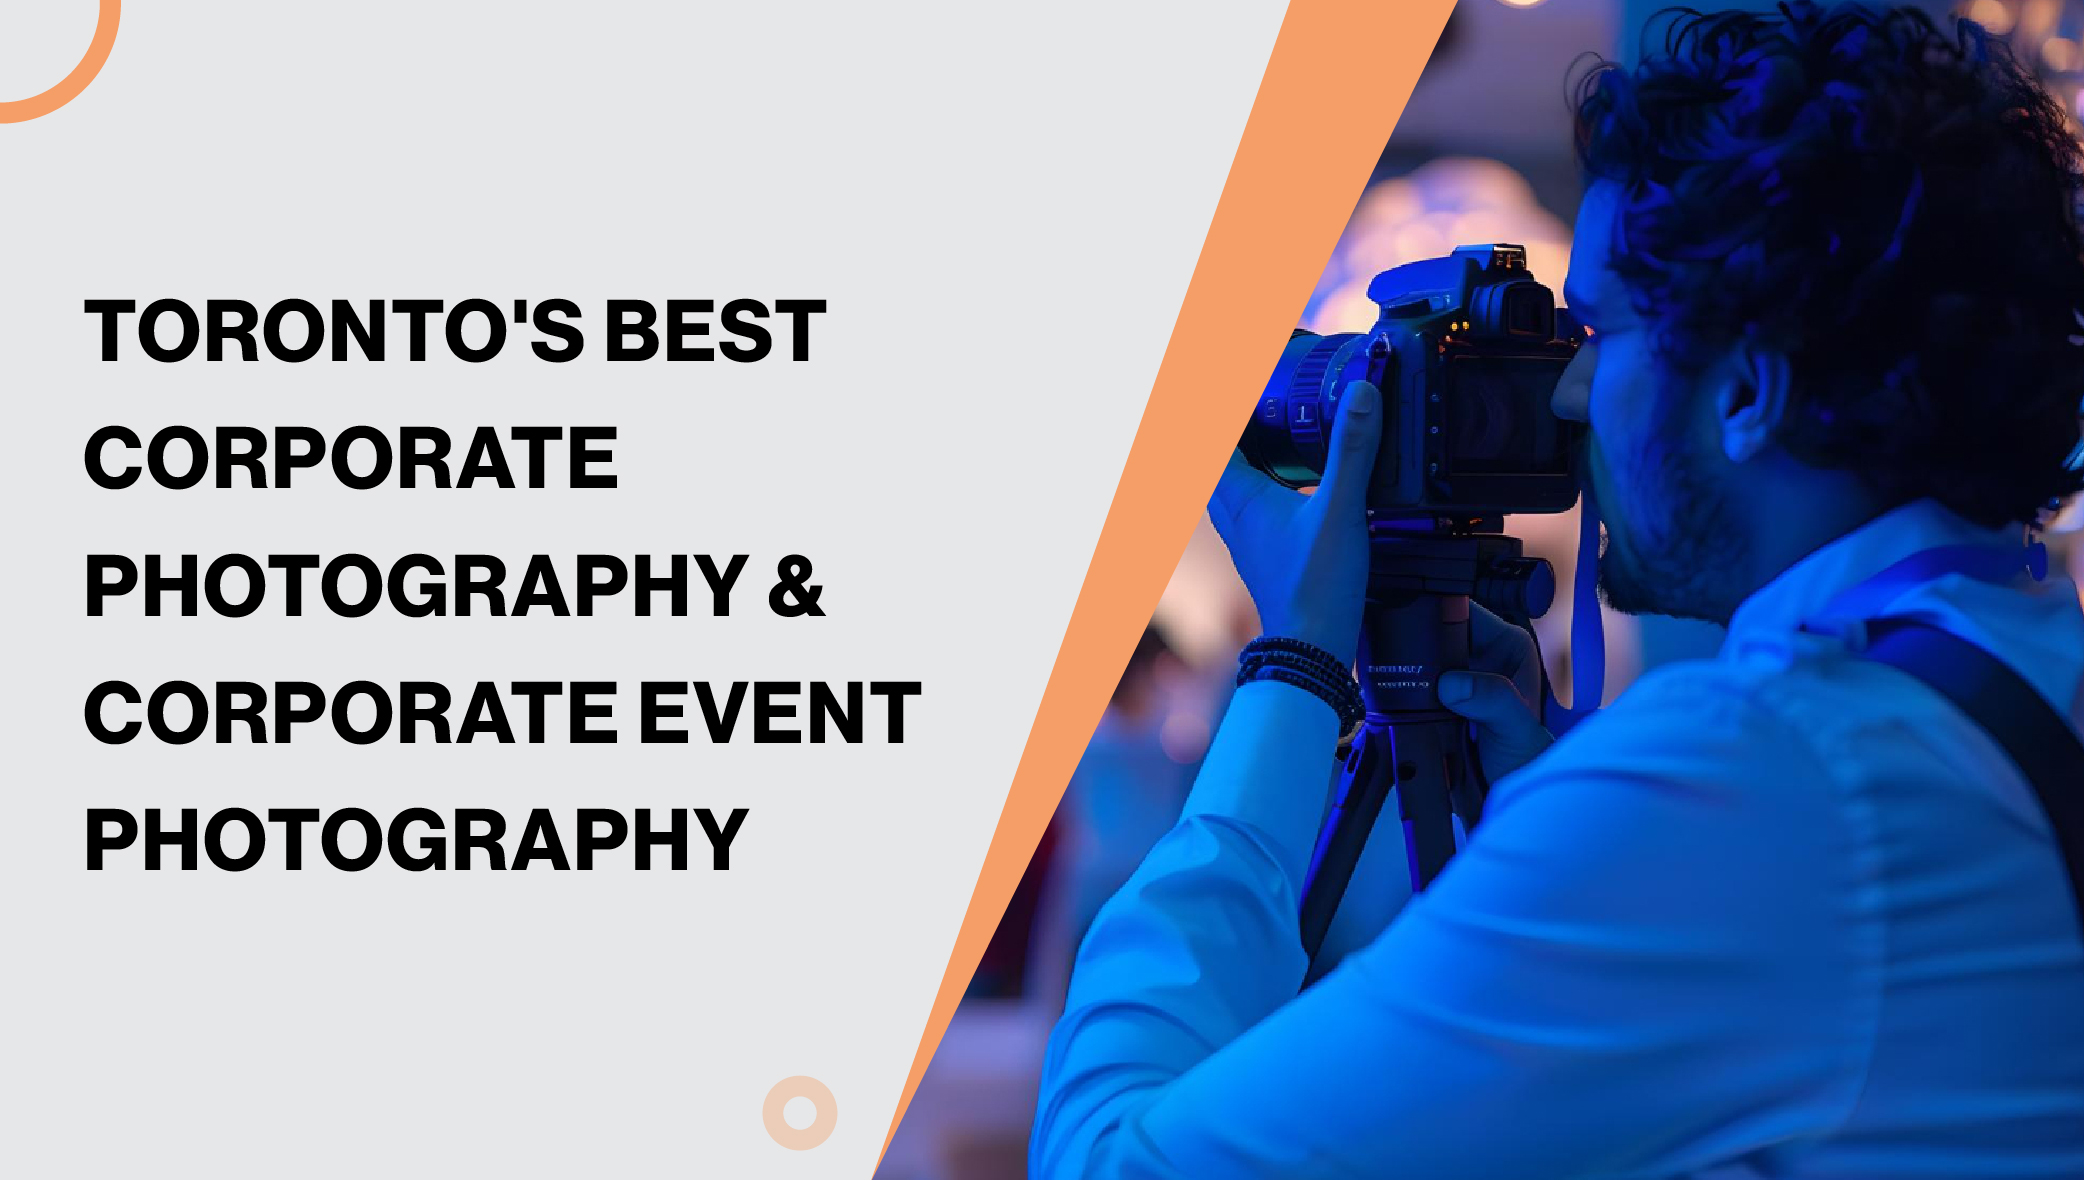 Toronto's Best Corporate & Event Photography Services